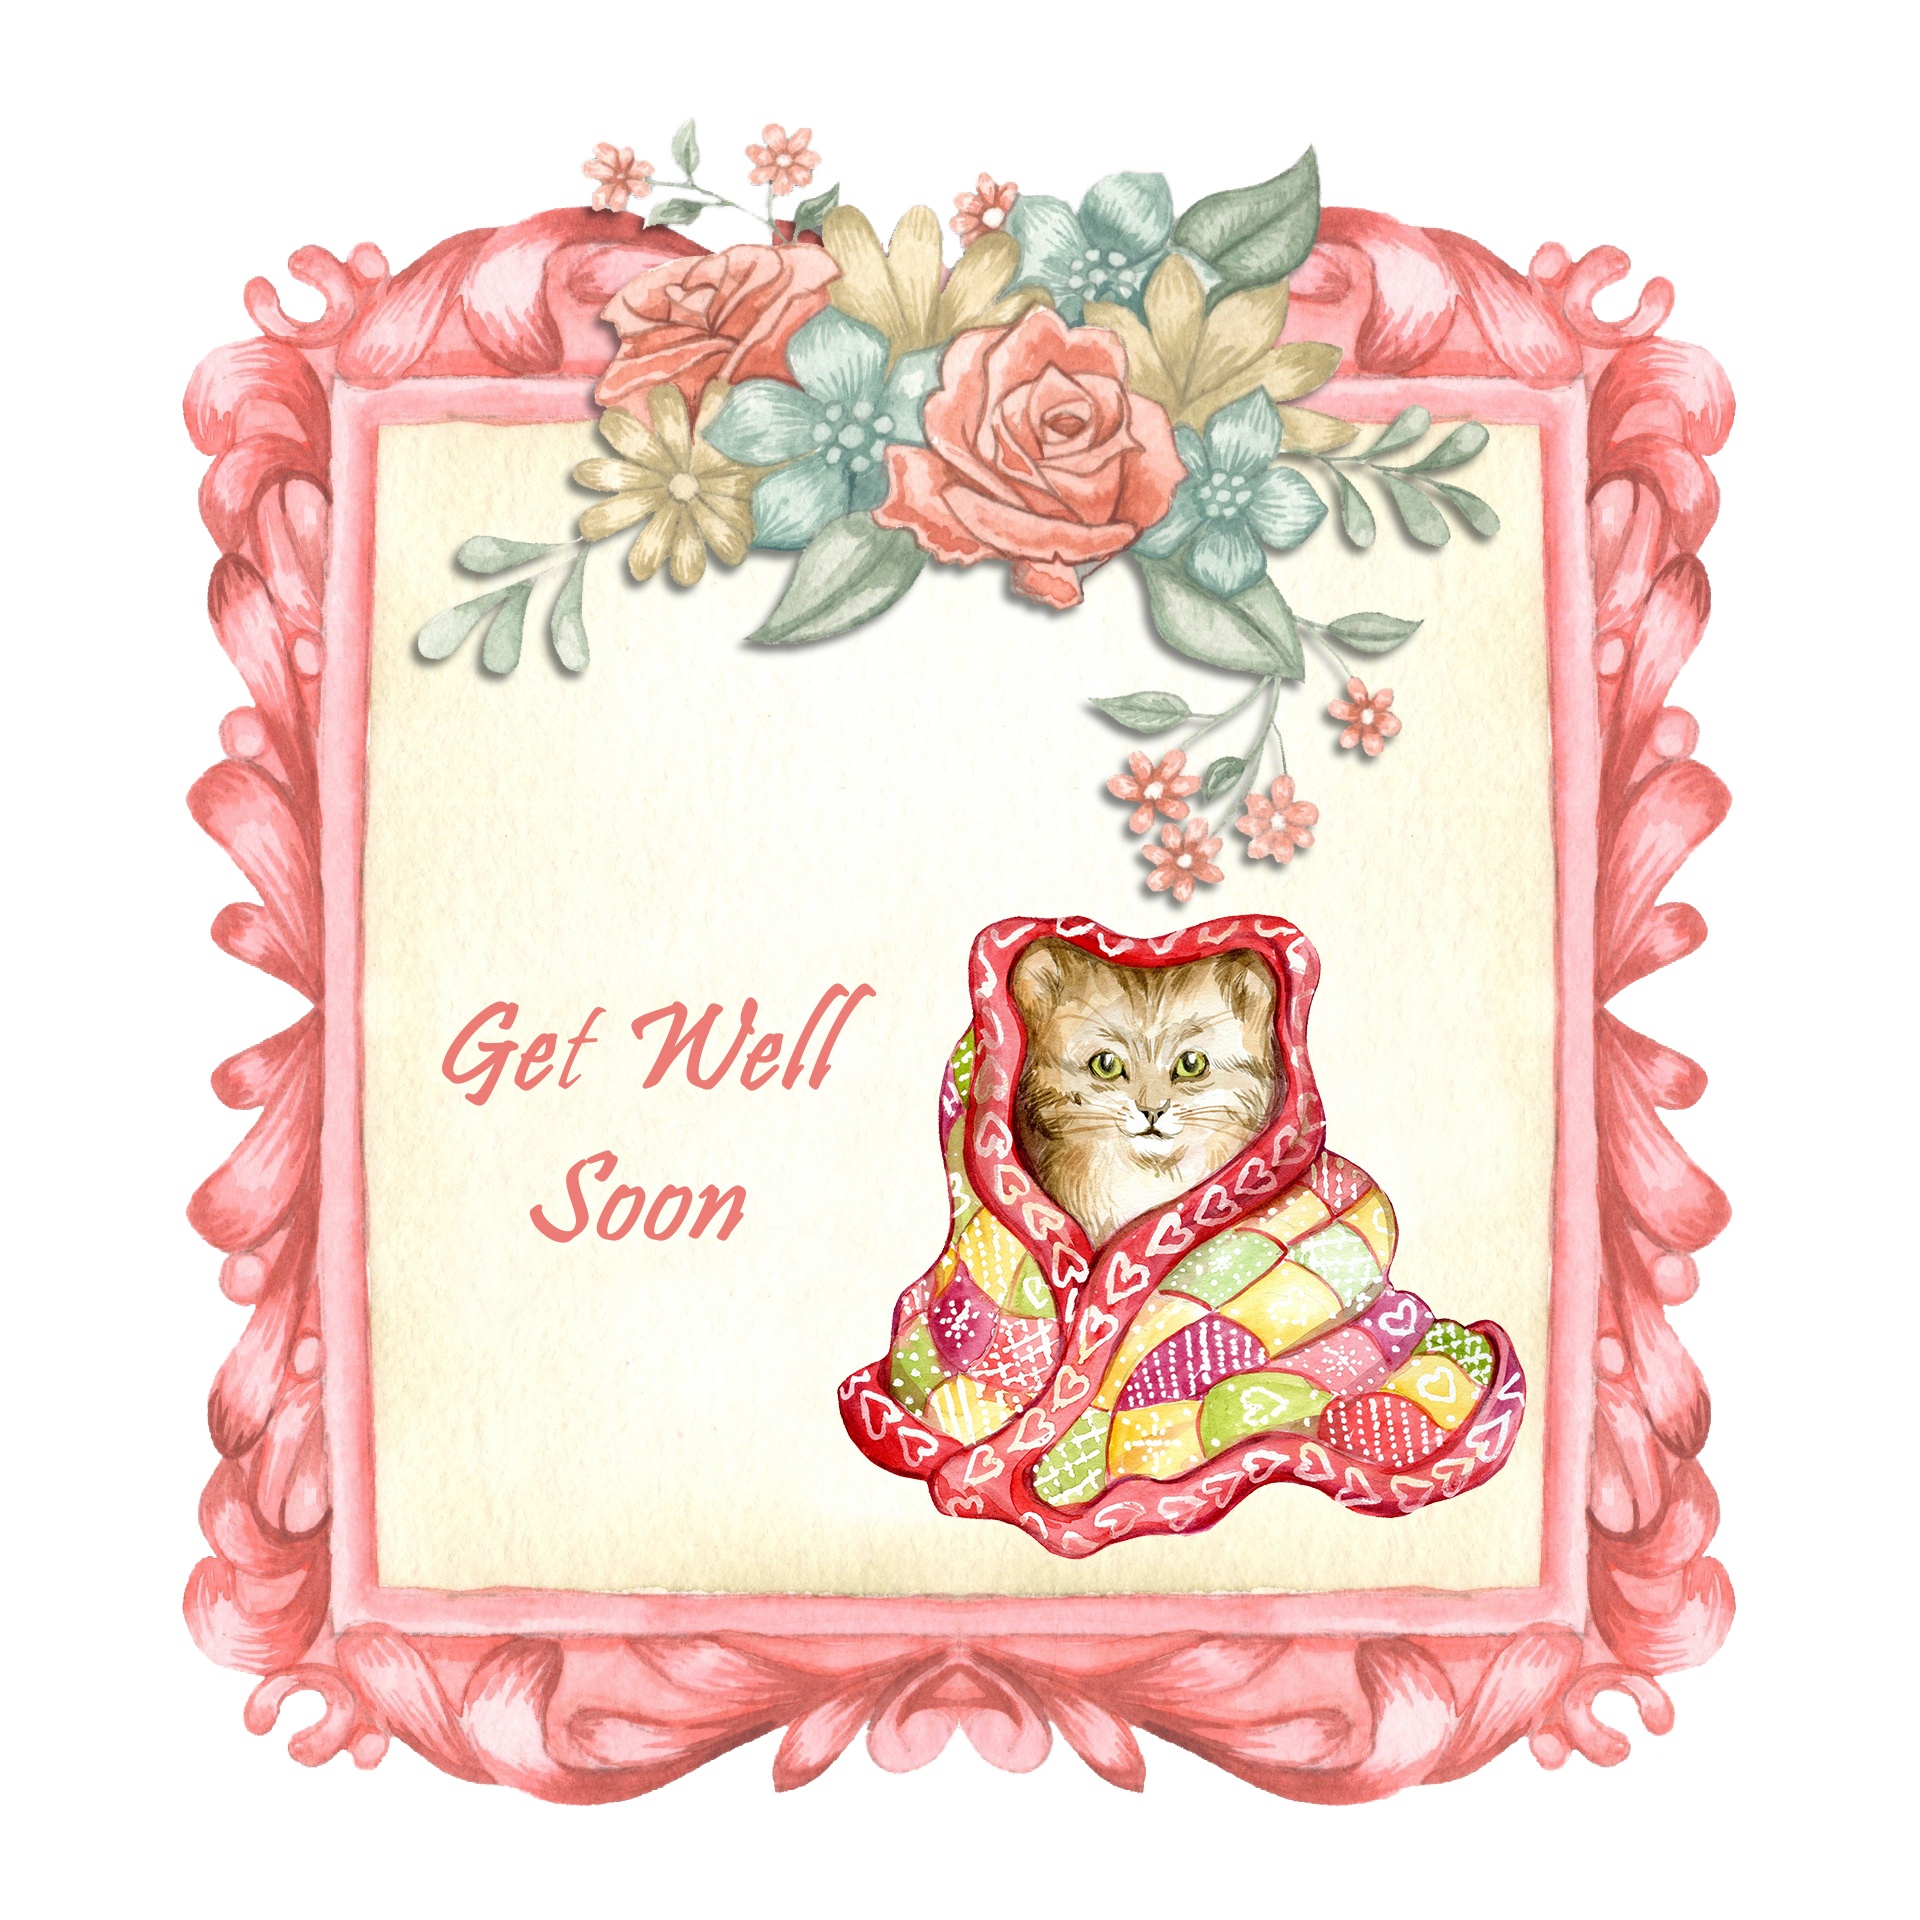 Cute watercolor painting of a vintage kitten in floral frame get well card template